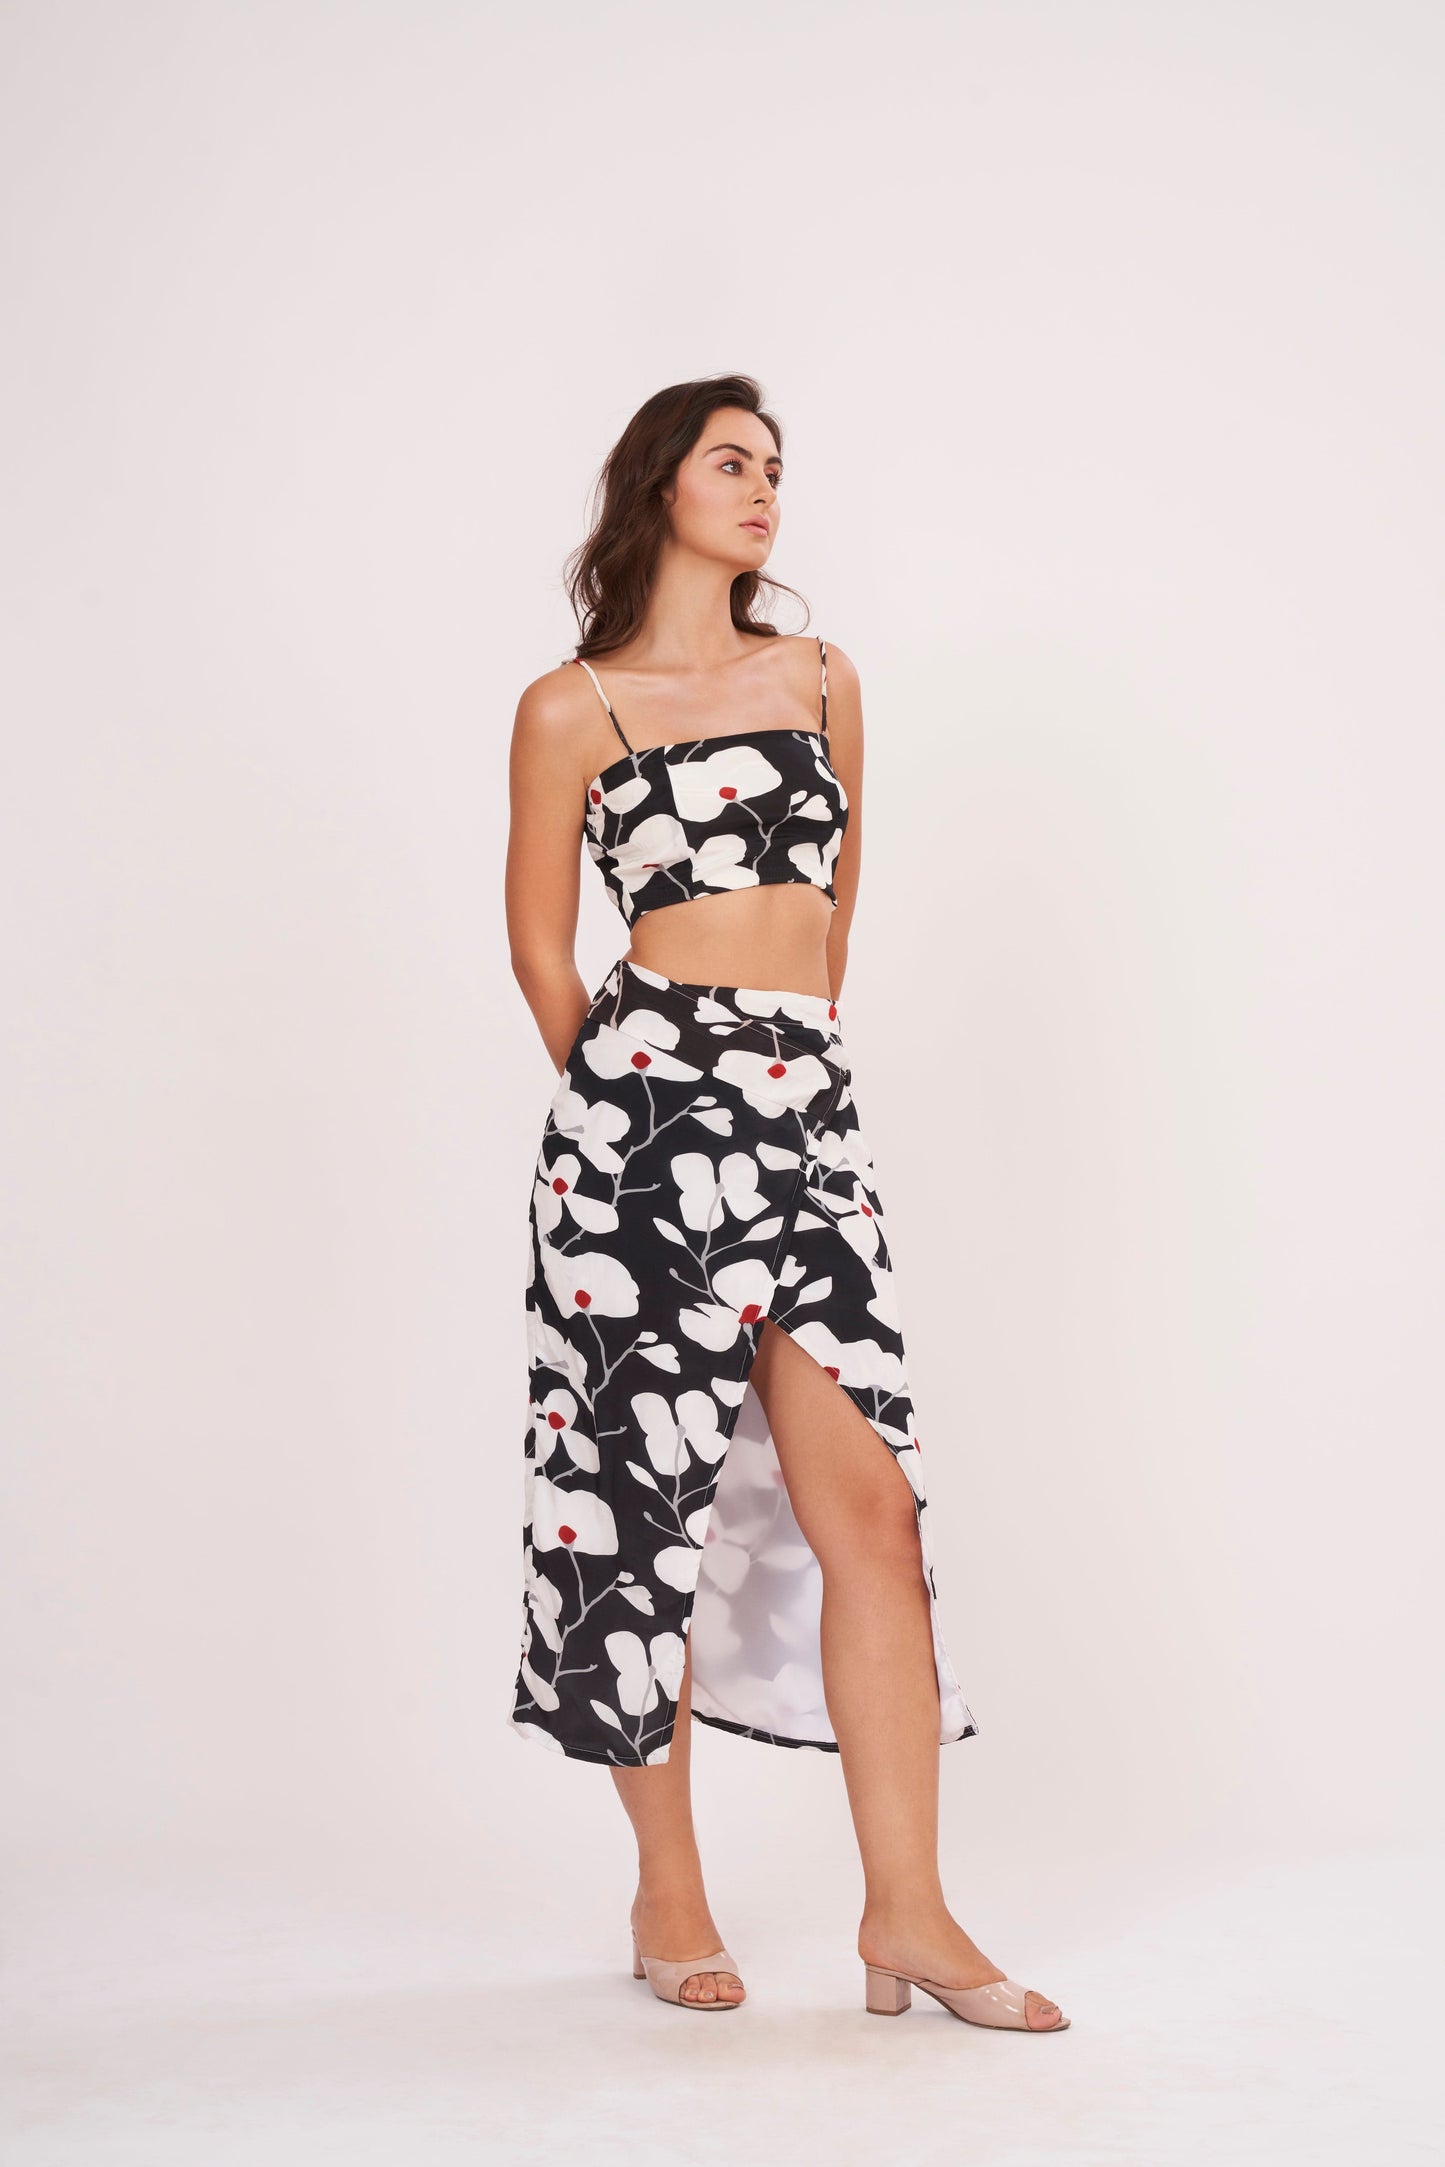 Black floral skirt from Designer Co Ord Set, made of premium crepe, designed to flatter silhouette and elongate legs, perfect for night out or date night.